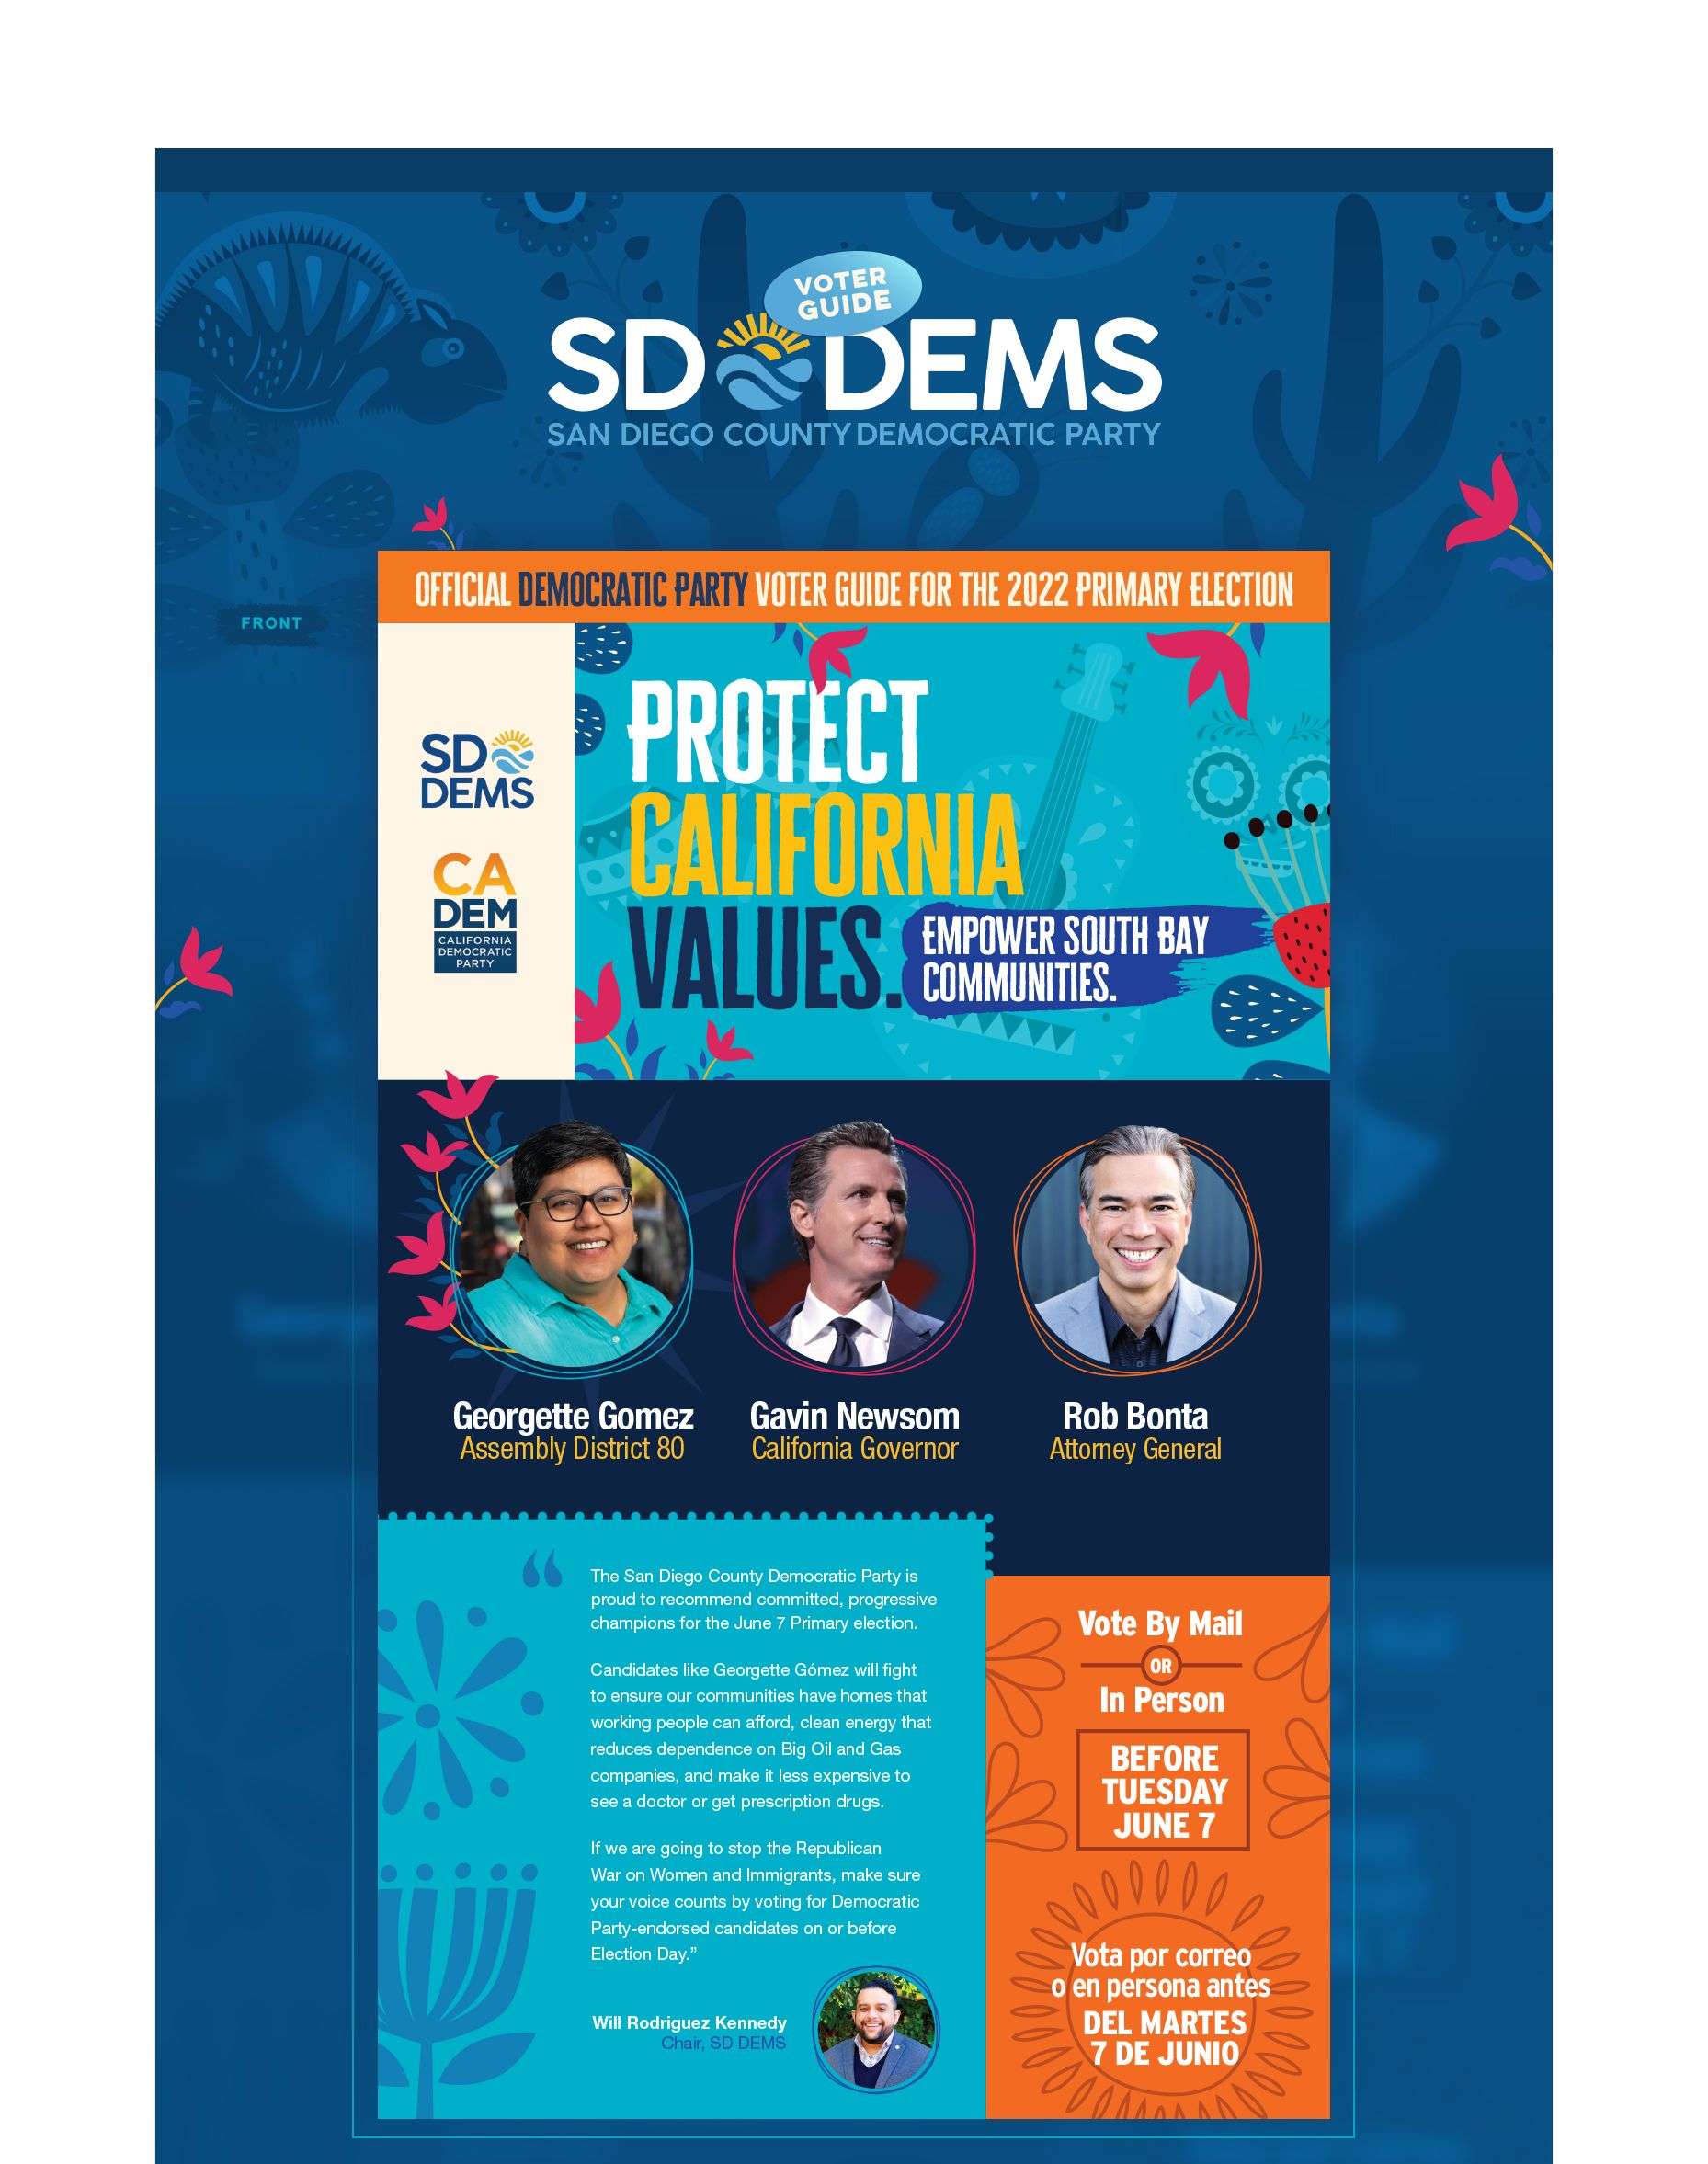 Joint Medias | Graphic design for San Diego County Democratic Party Voter Guide